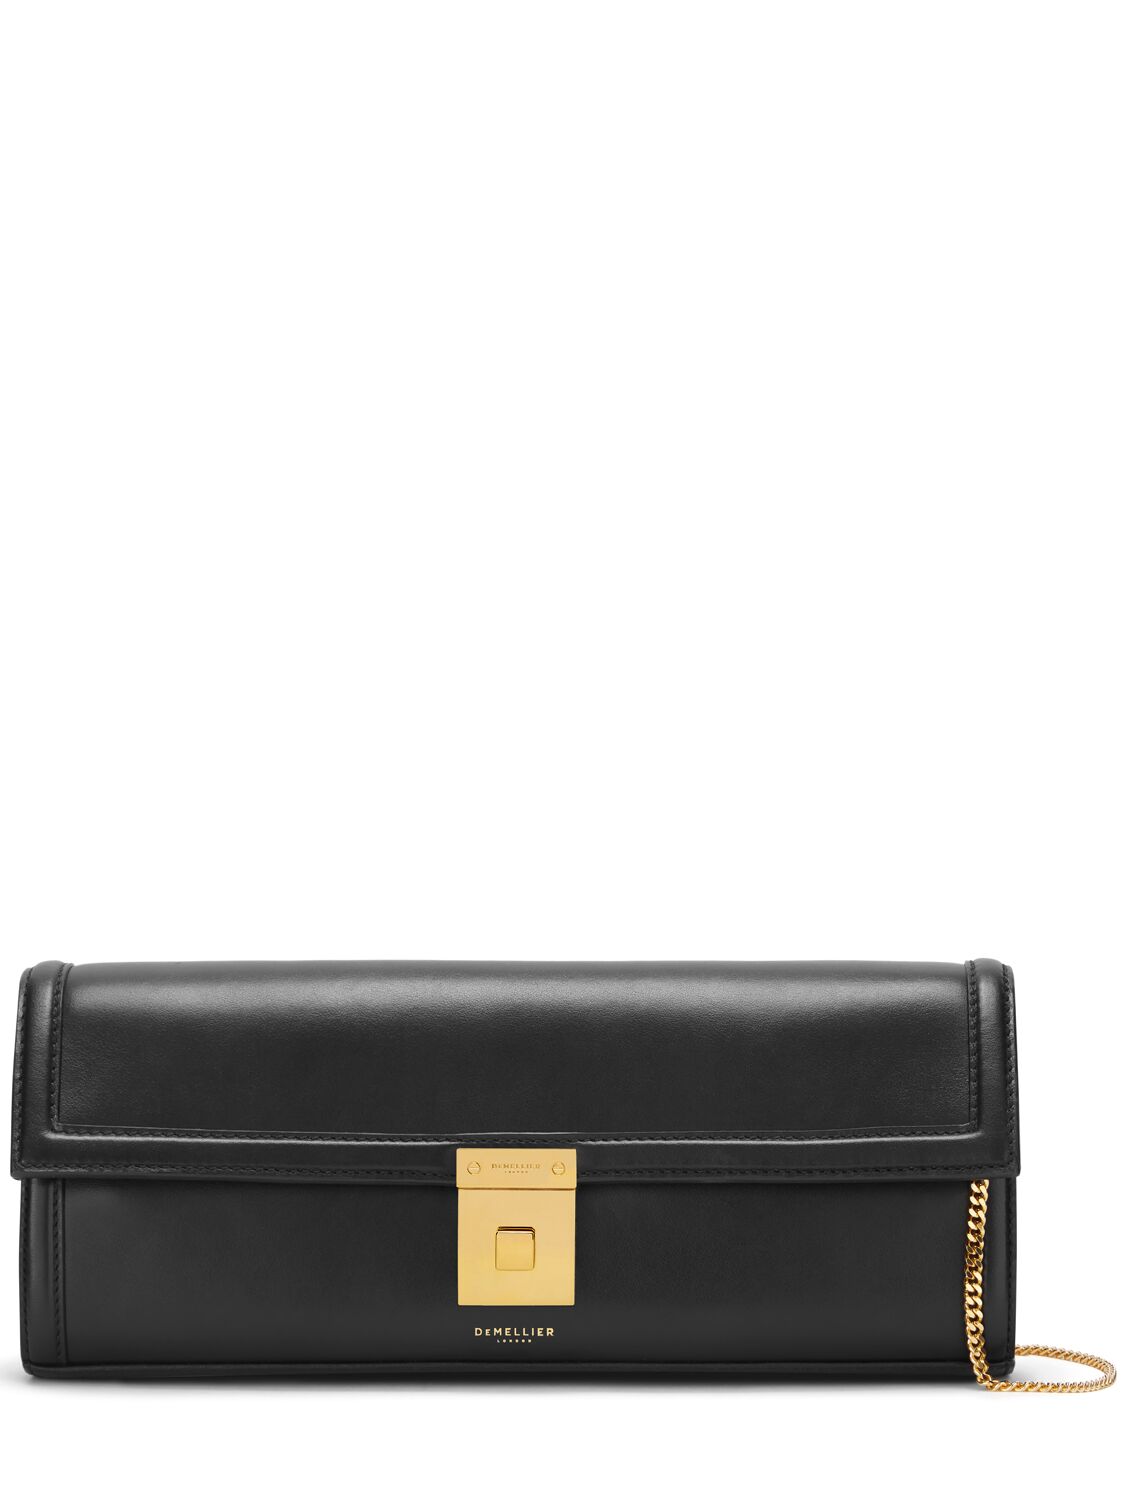 Demellier Paris Smooth Leather Clutch In Black